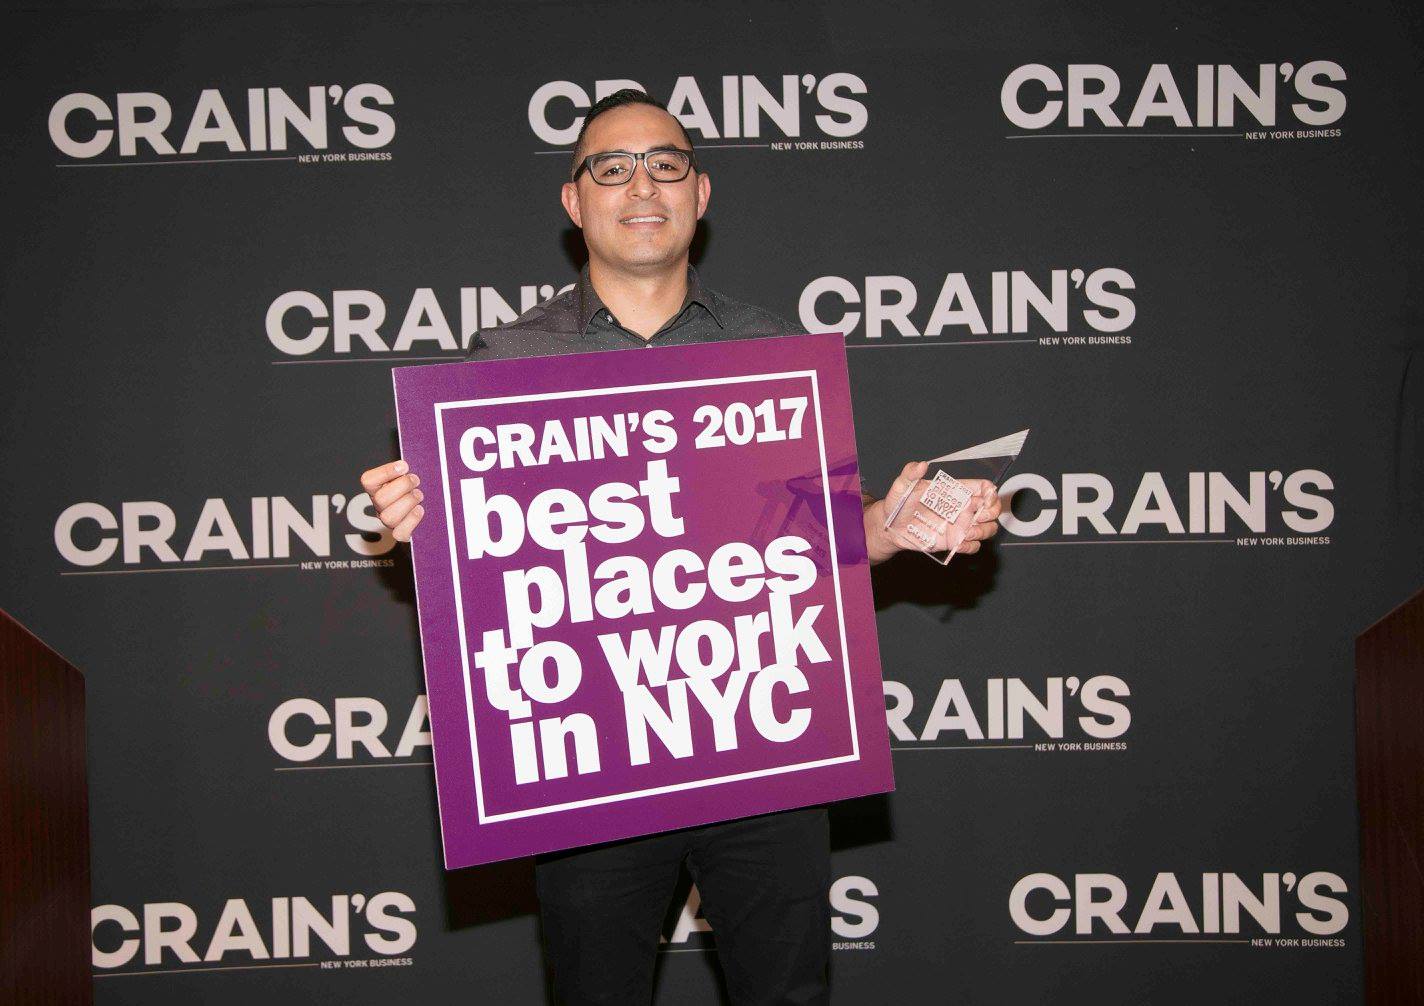 Dom & Tom Named to Crain’s 2017 Best Places to Work in NYC List